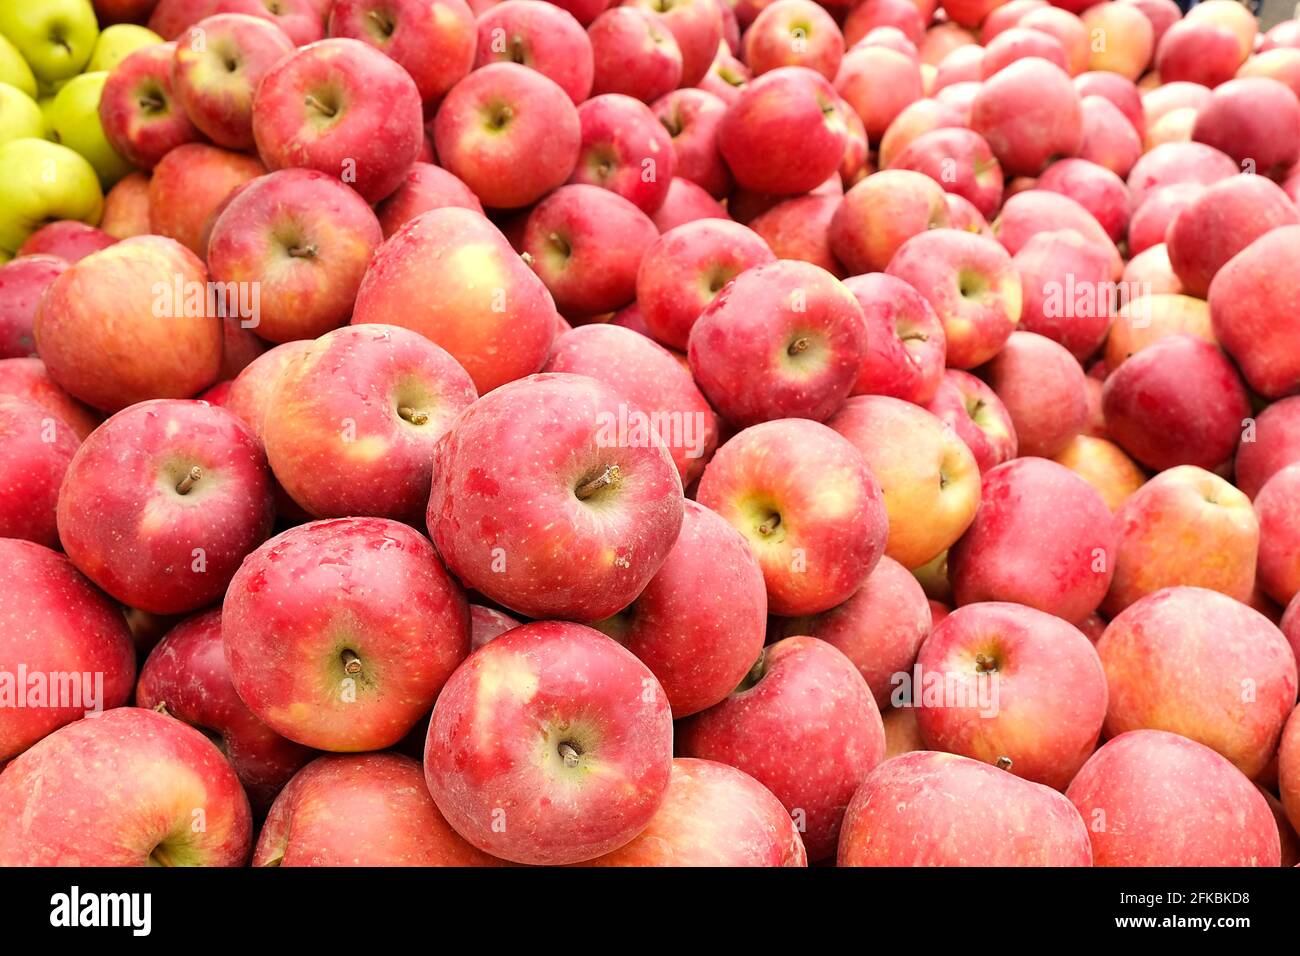 https://c8.alamy.com/comp/2FKBKD8/a-bunch-of-ripe-freshly-picked-organic-crunchy-red-apples-at-local-produce-farmers-market-counter-clean-eating-concept-sweet-fruits-for-fit-and-heal-2FKBKD8.jpg